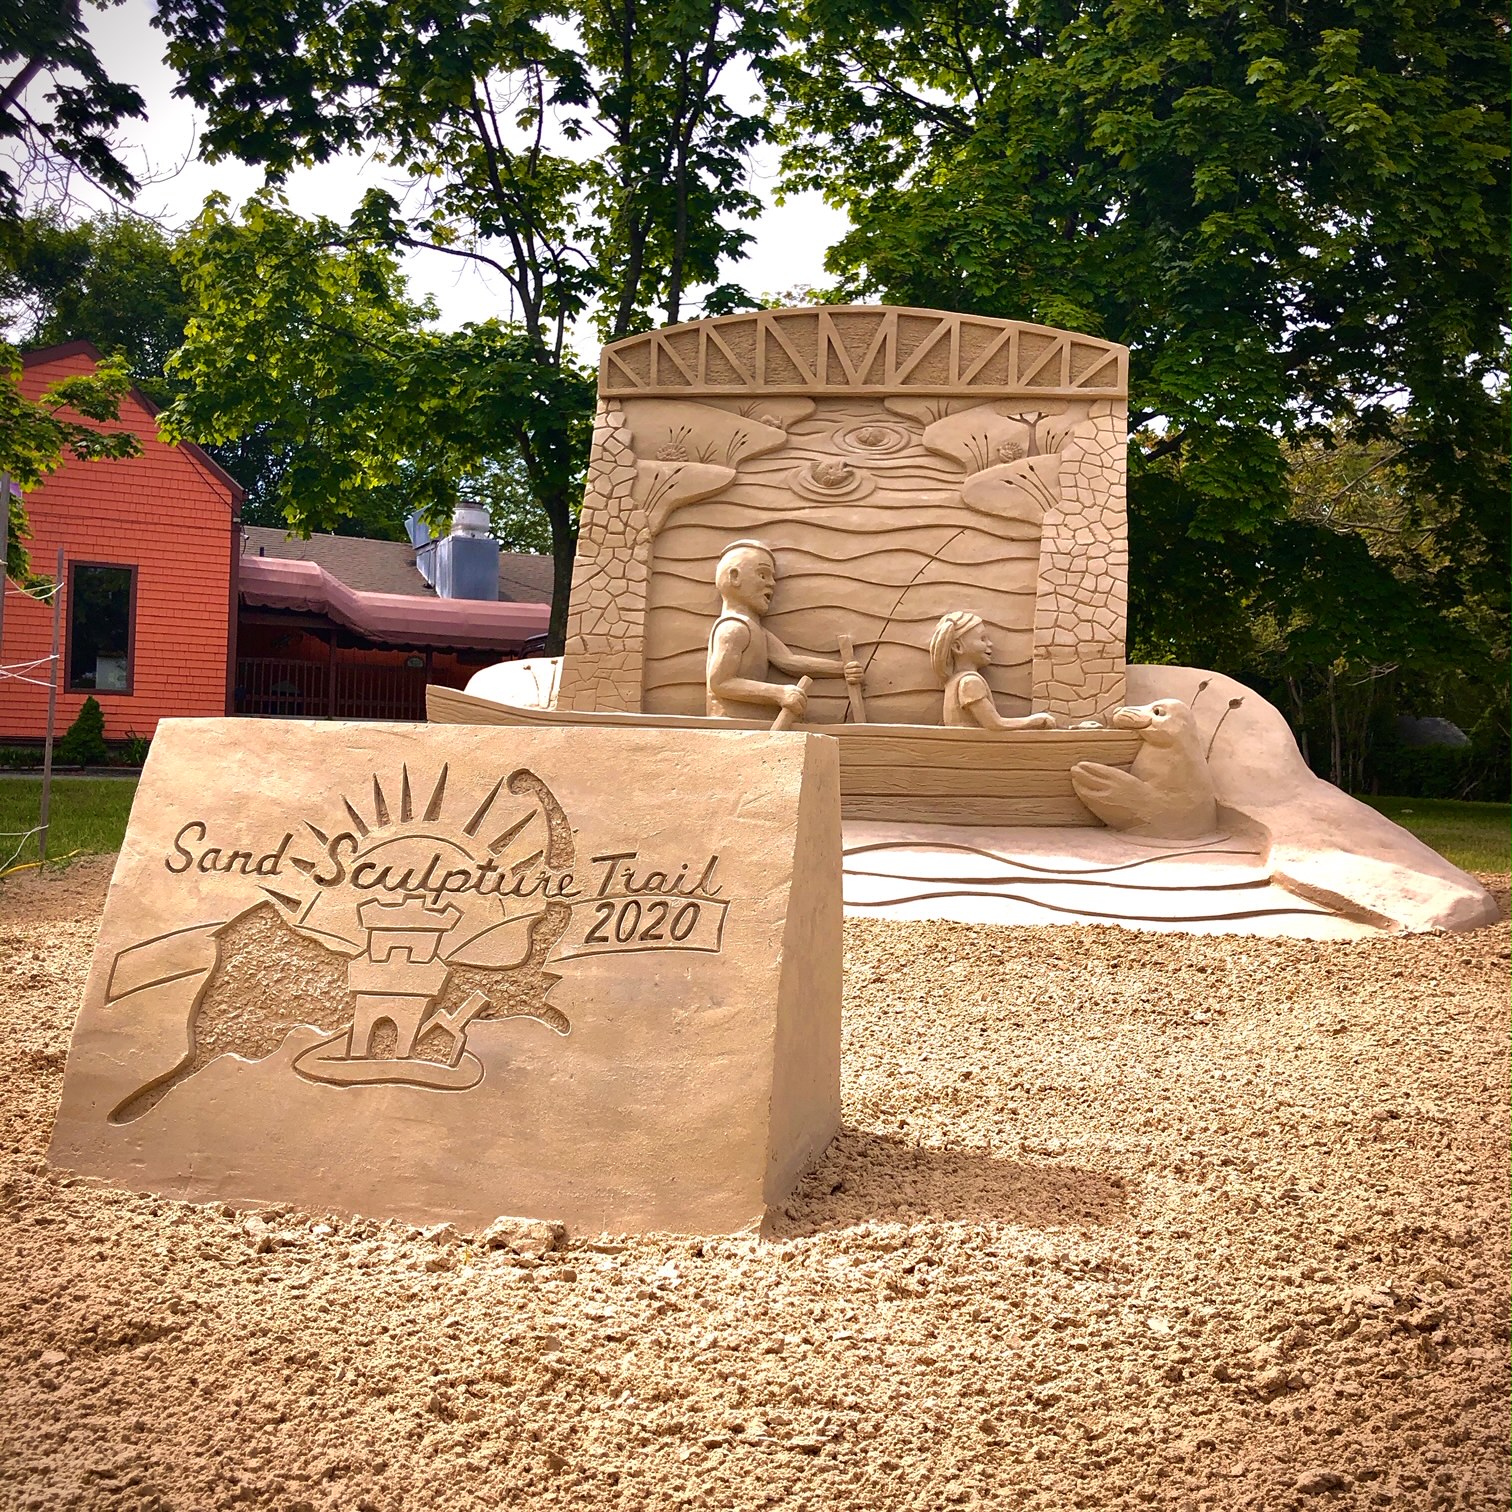 Cape Cod’s Sand Sculpture Trail is back again Yarmouth Chamber of